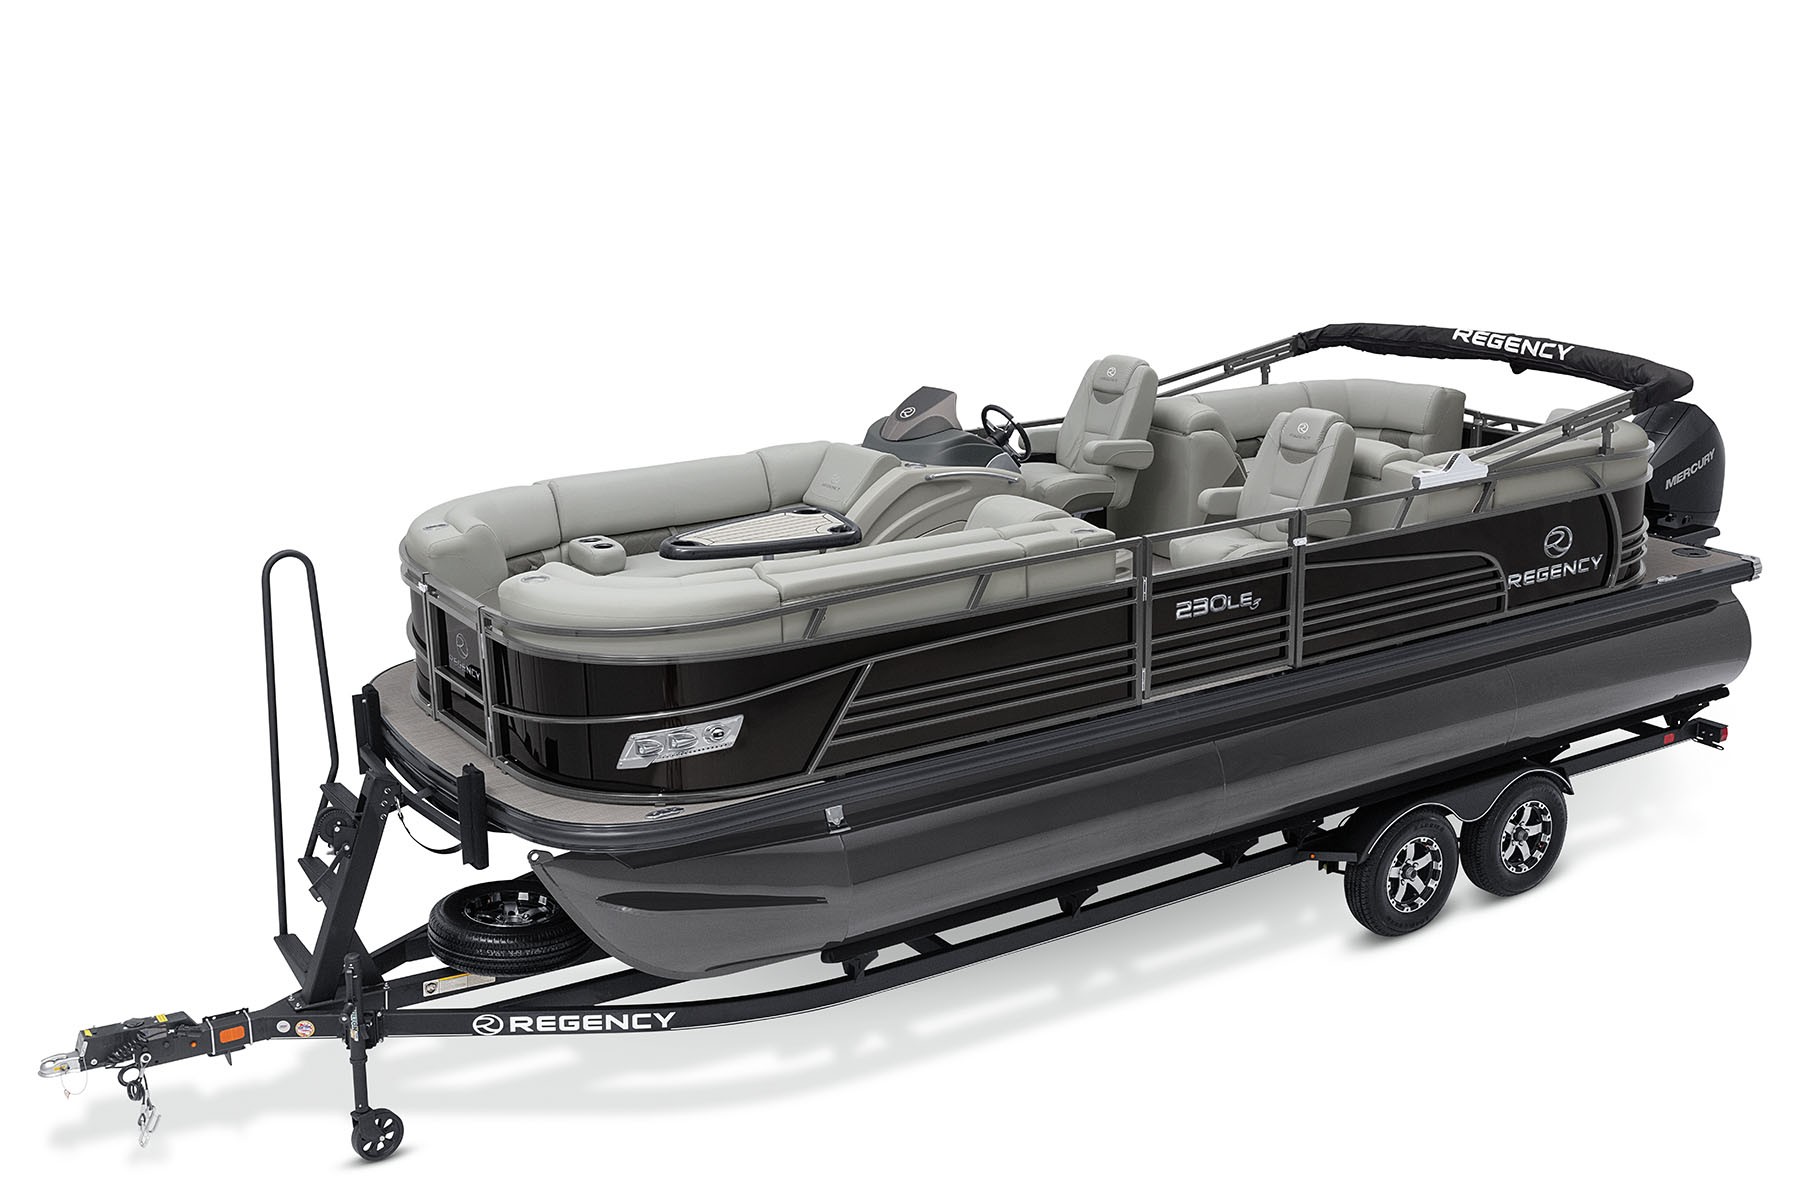 2023 REGENCY Luxury-Pontoon - 230 LE3 for sale in the Pompano Beach, FL area. Get the best drive out price on 2023 REGENCY Luxury-Pontoon - 230 LE3 and compare.